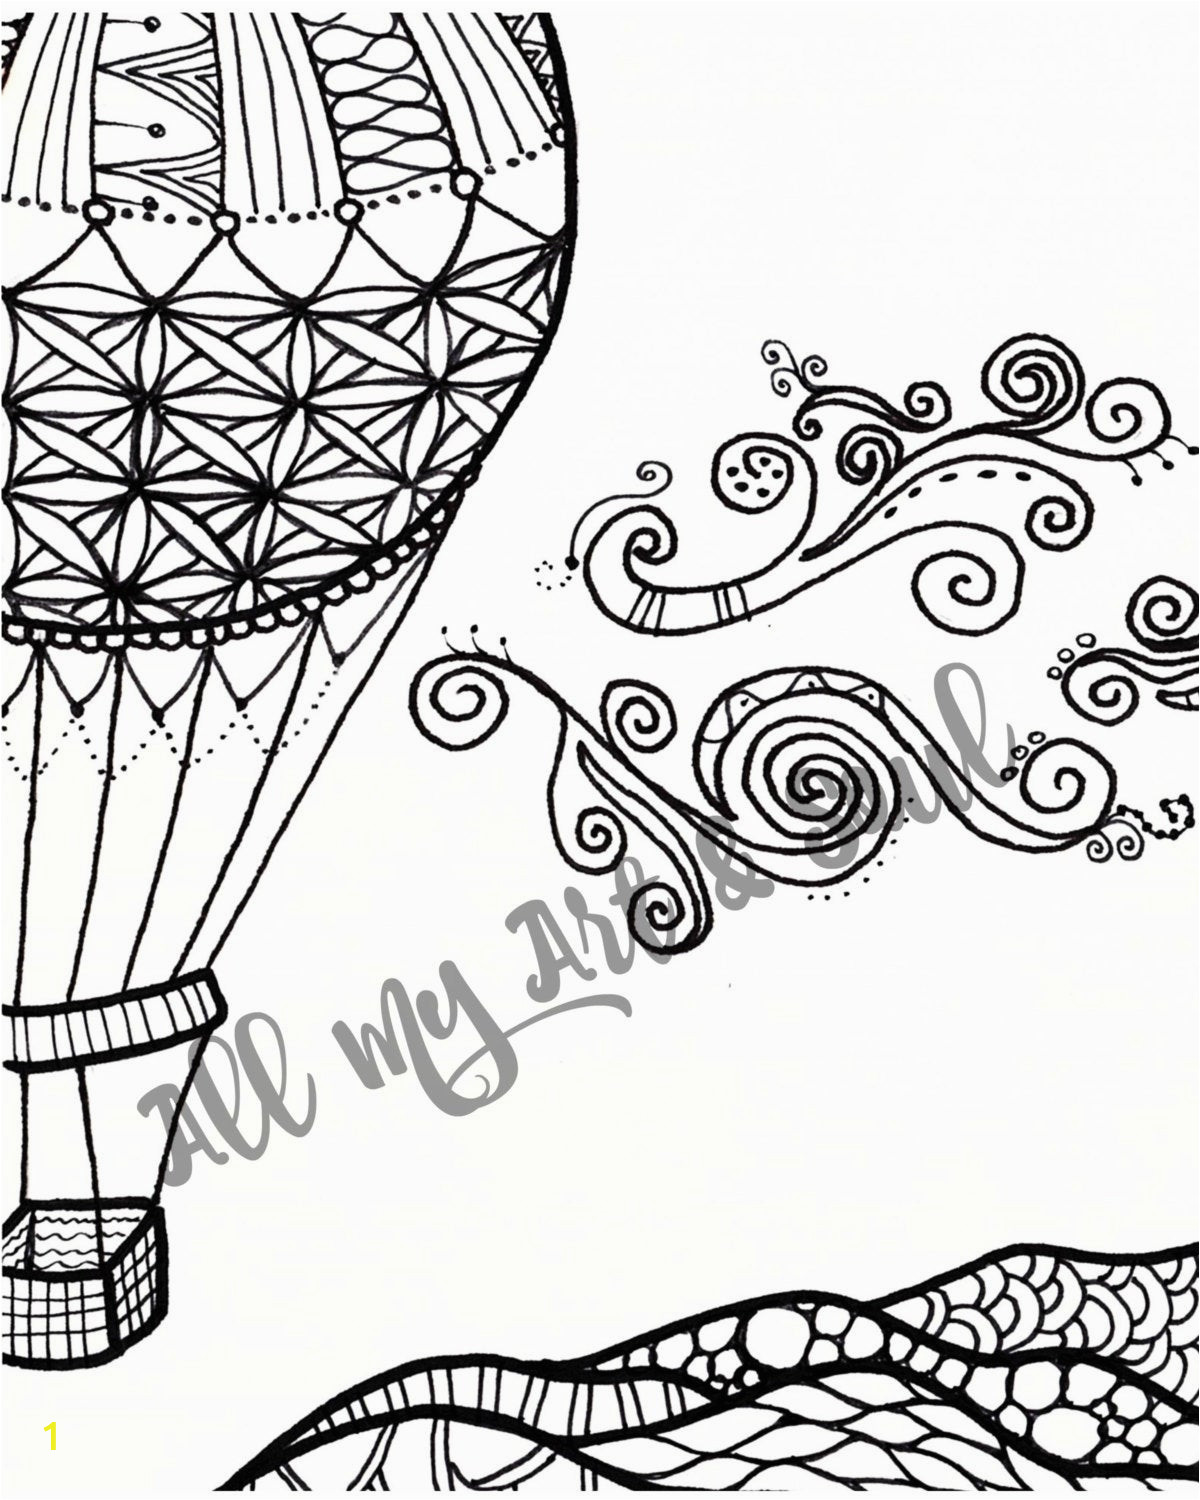 Hot Air Balloon Coloring Page for Adults Adult Coloring Page Hot Air Balloon Instant Download